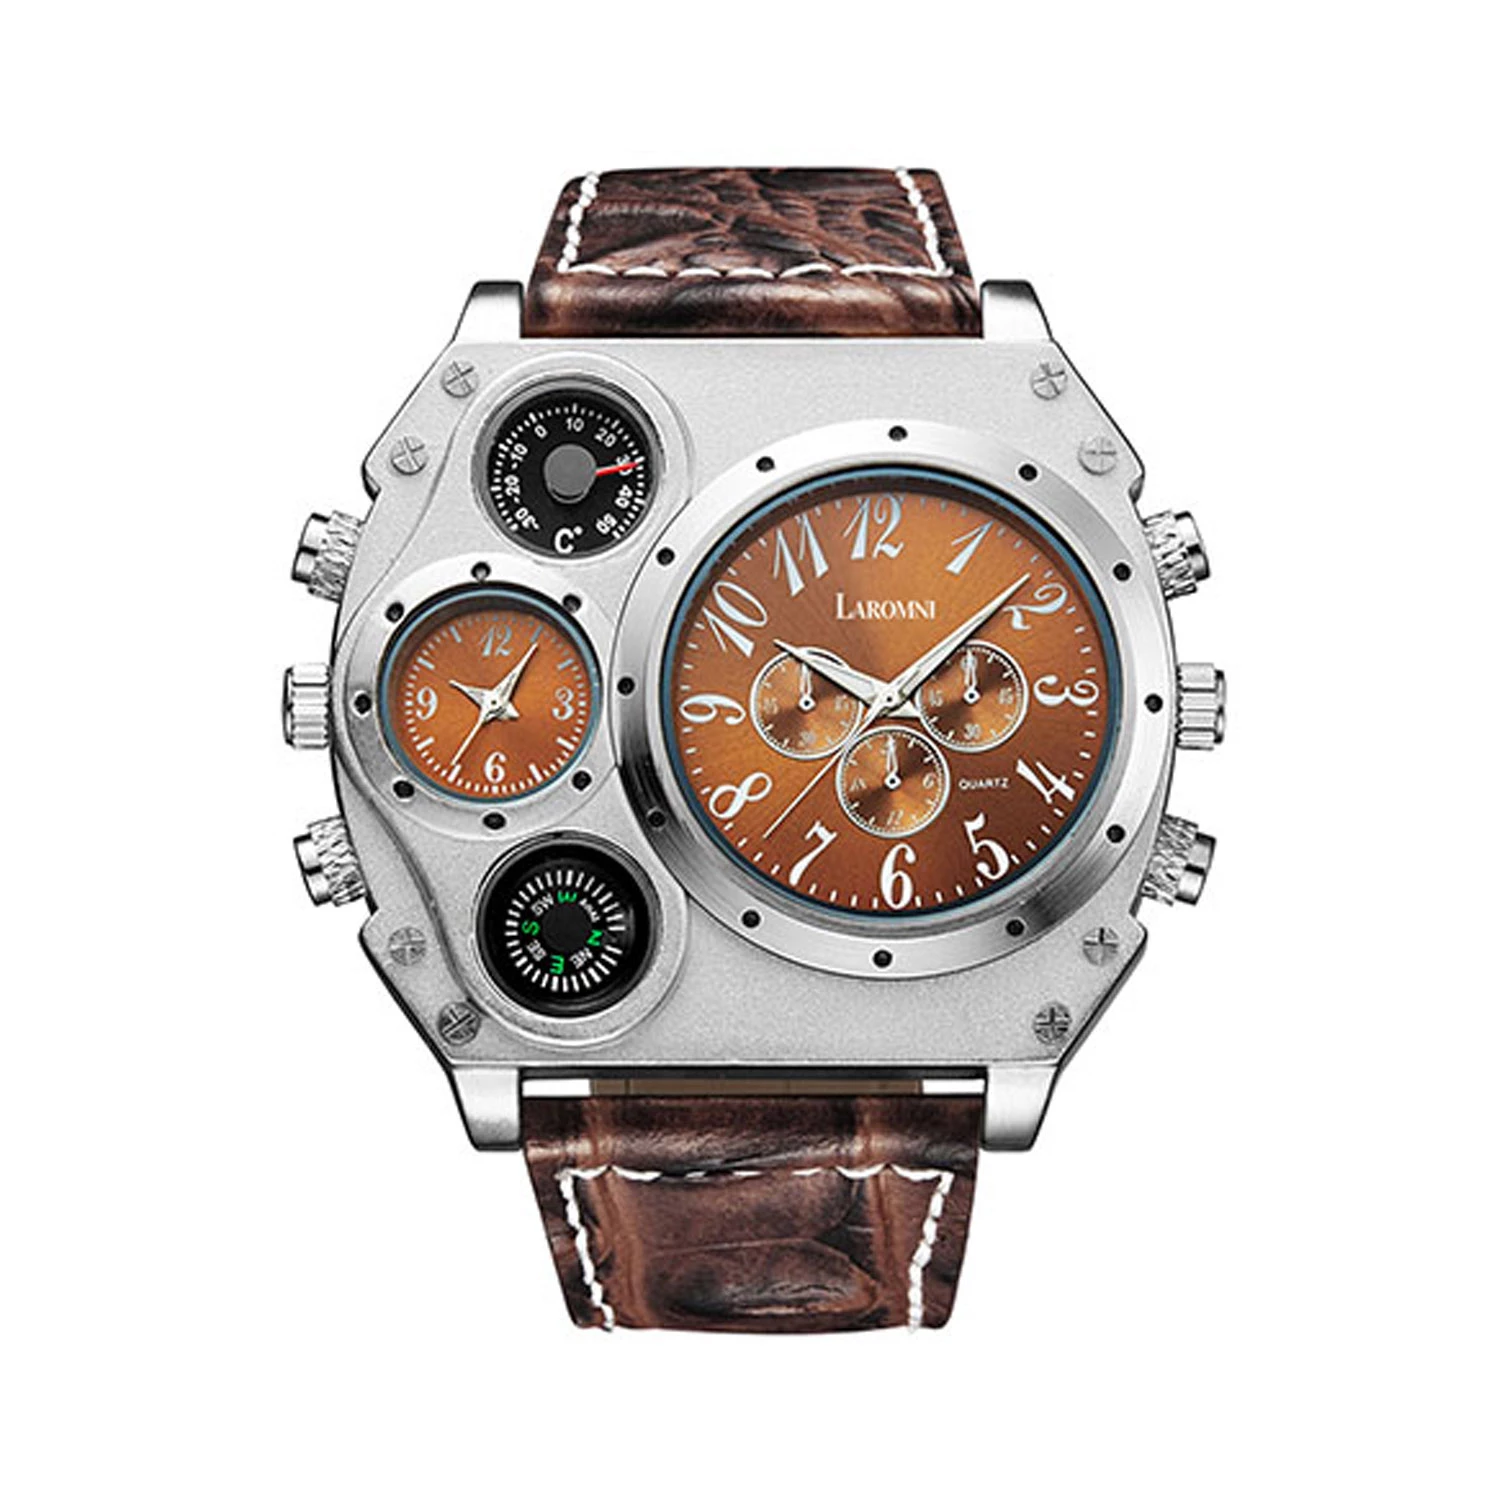 Men’s Quartz Watch Two Time Zone Big Face Military Style Compass Thermometer Decorative Dial PU Leat